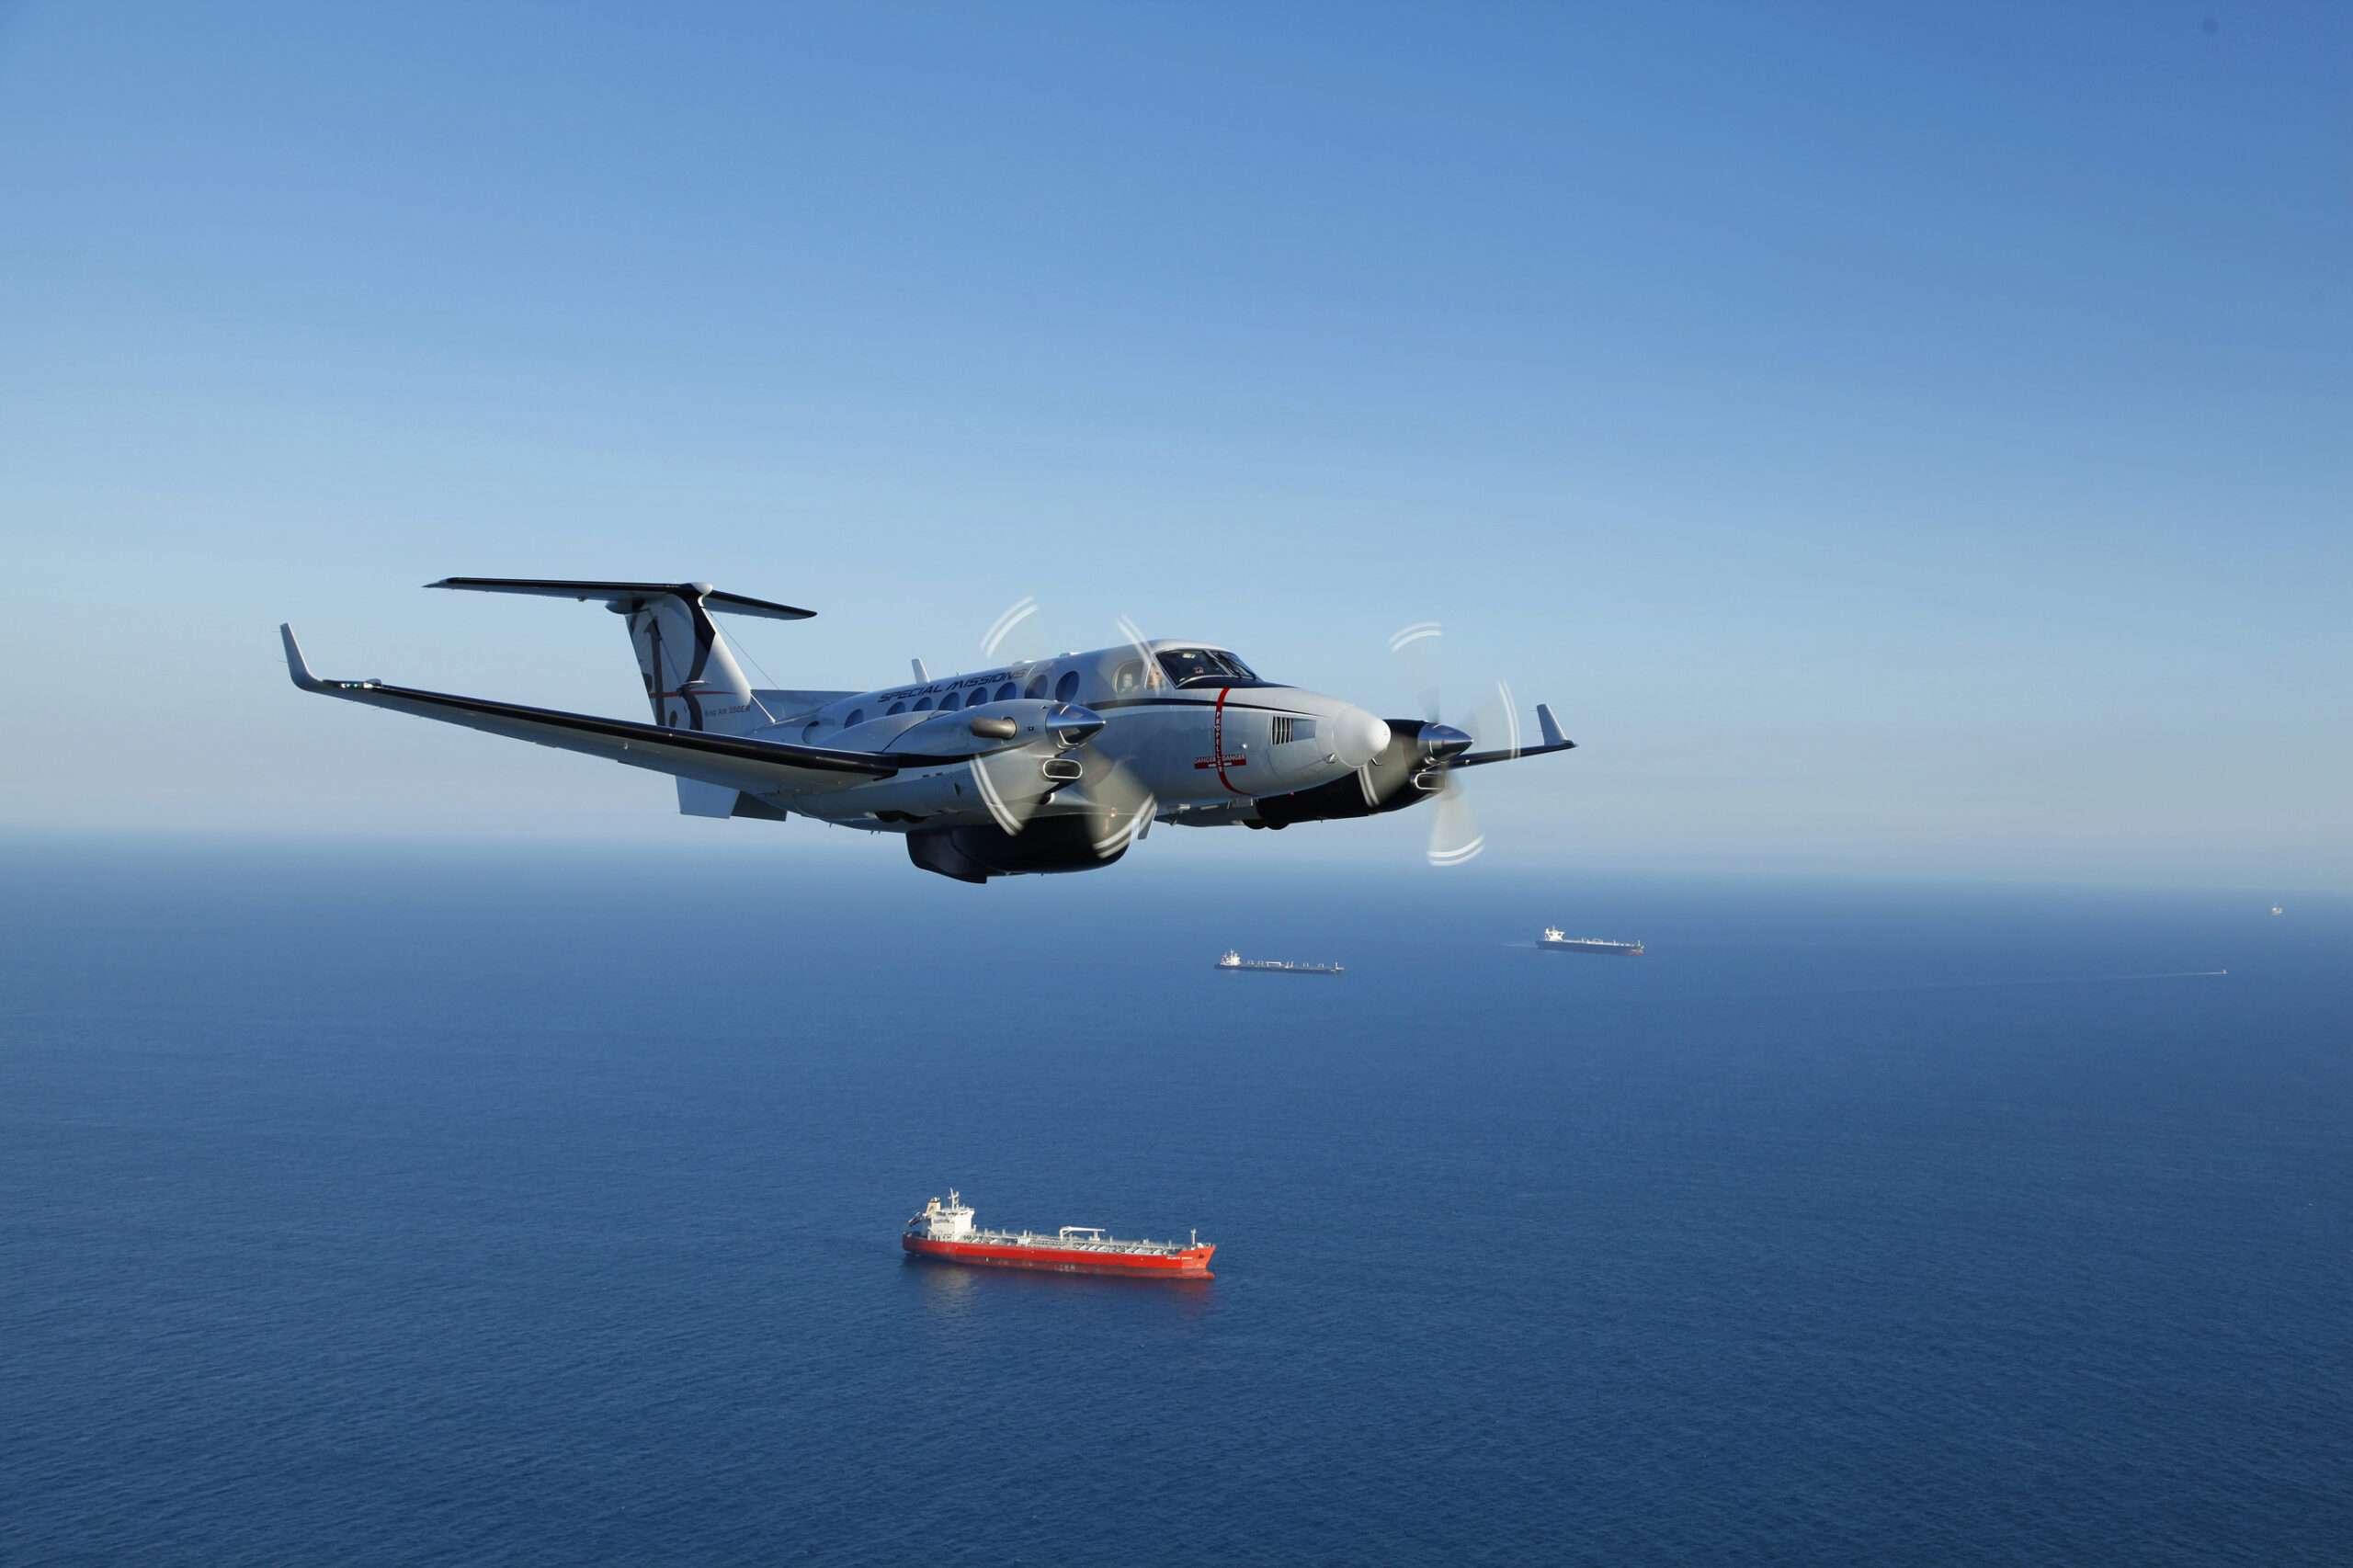 A US Army special mission Beechcraft King Air 360 in flight over sea.